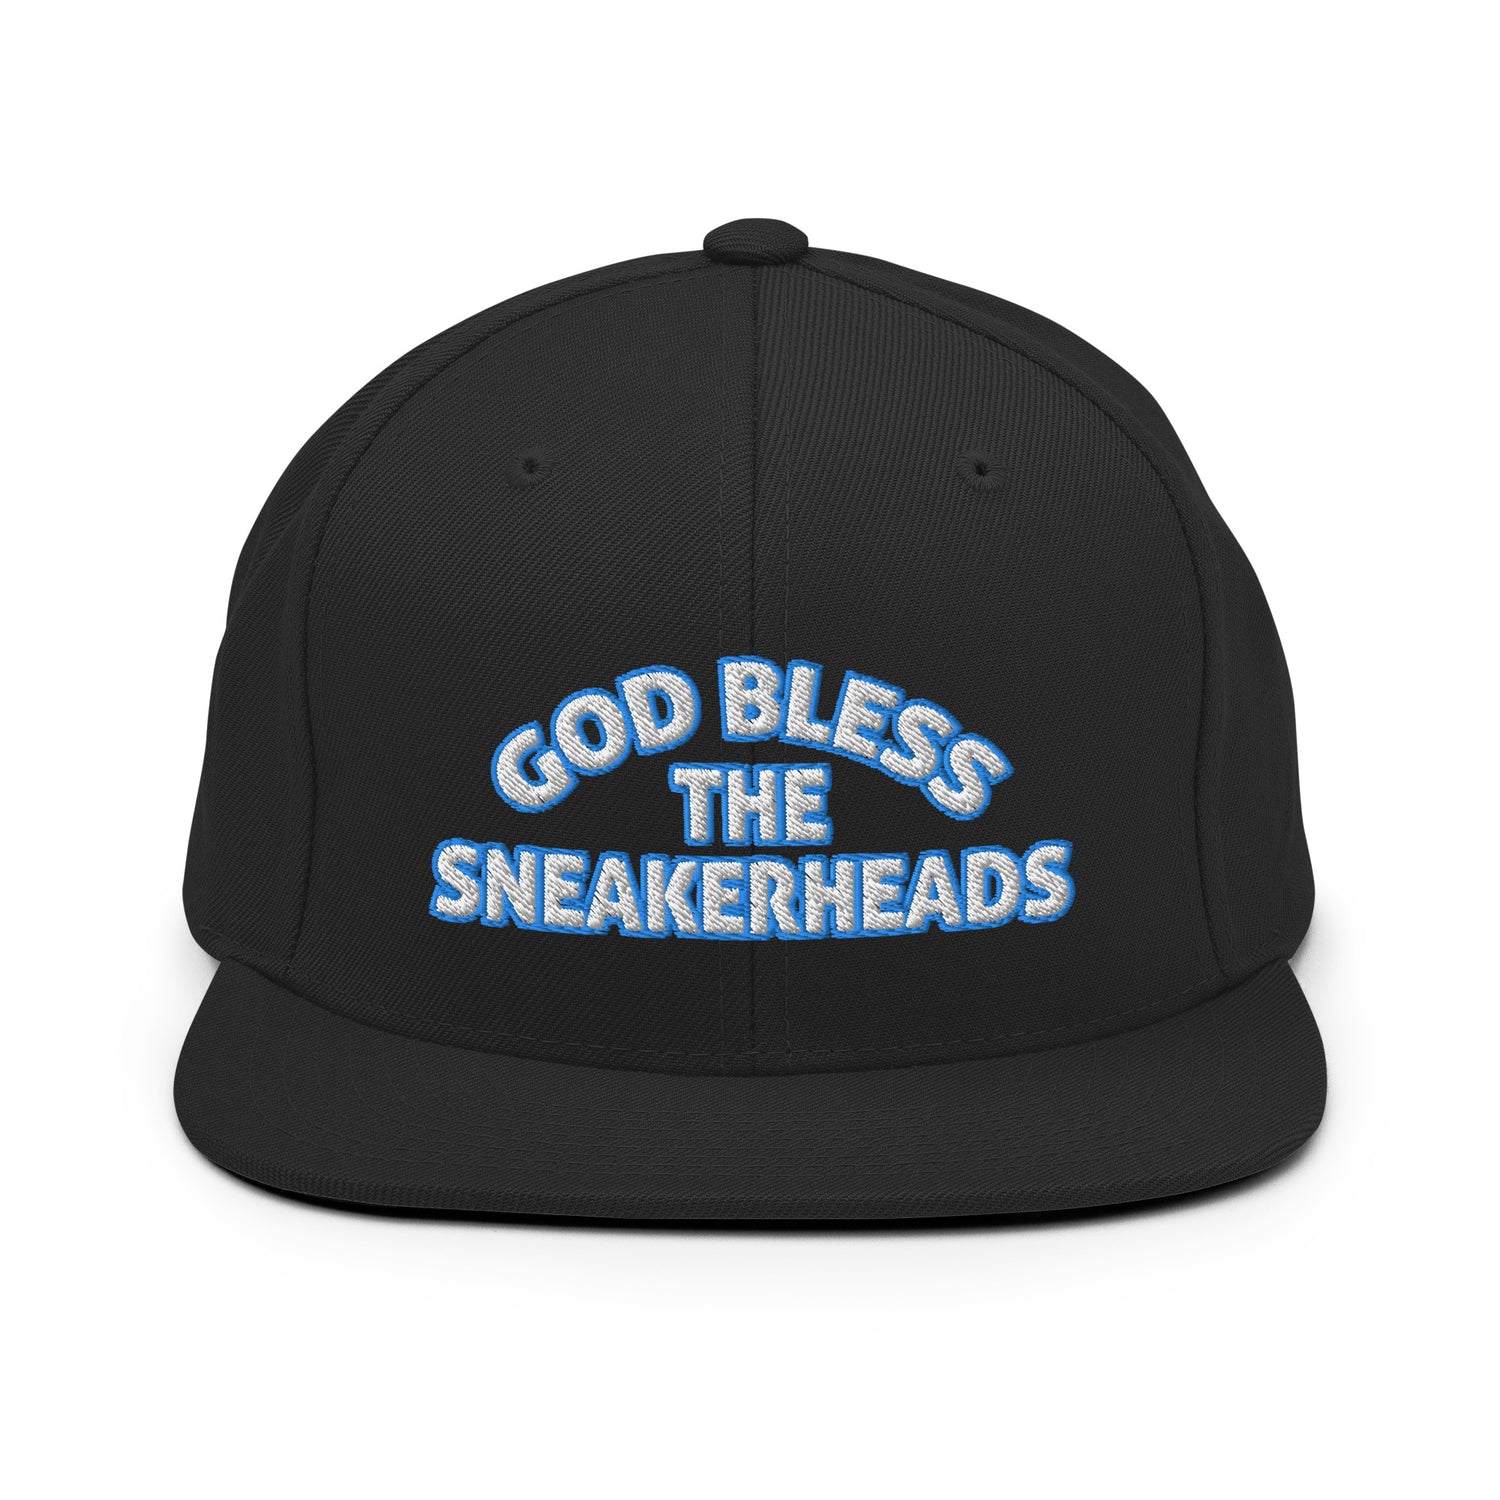 Hats for Sneakerheads